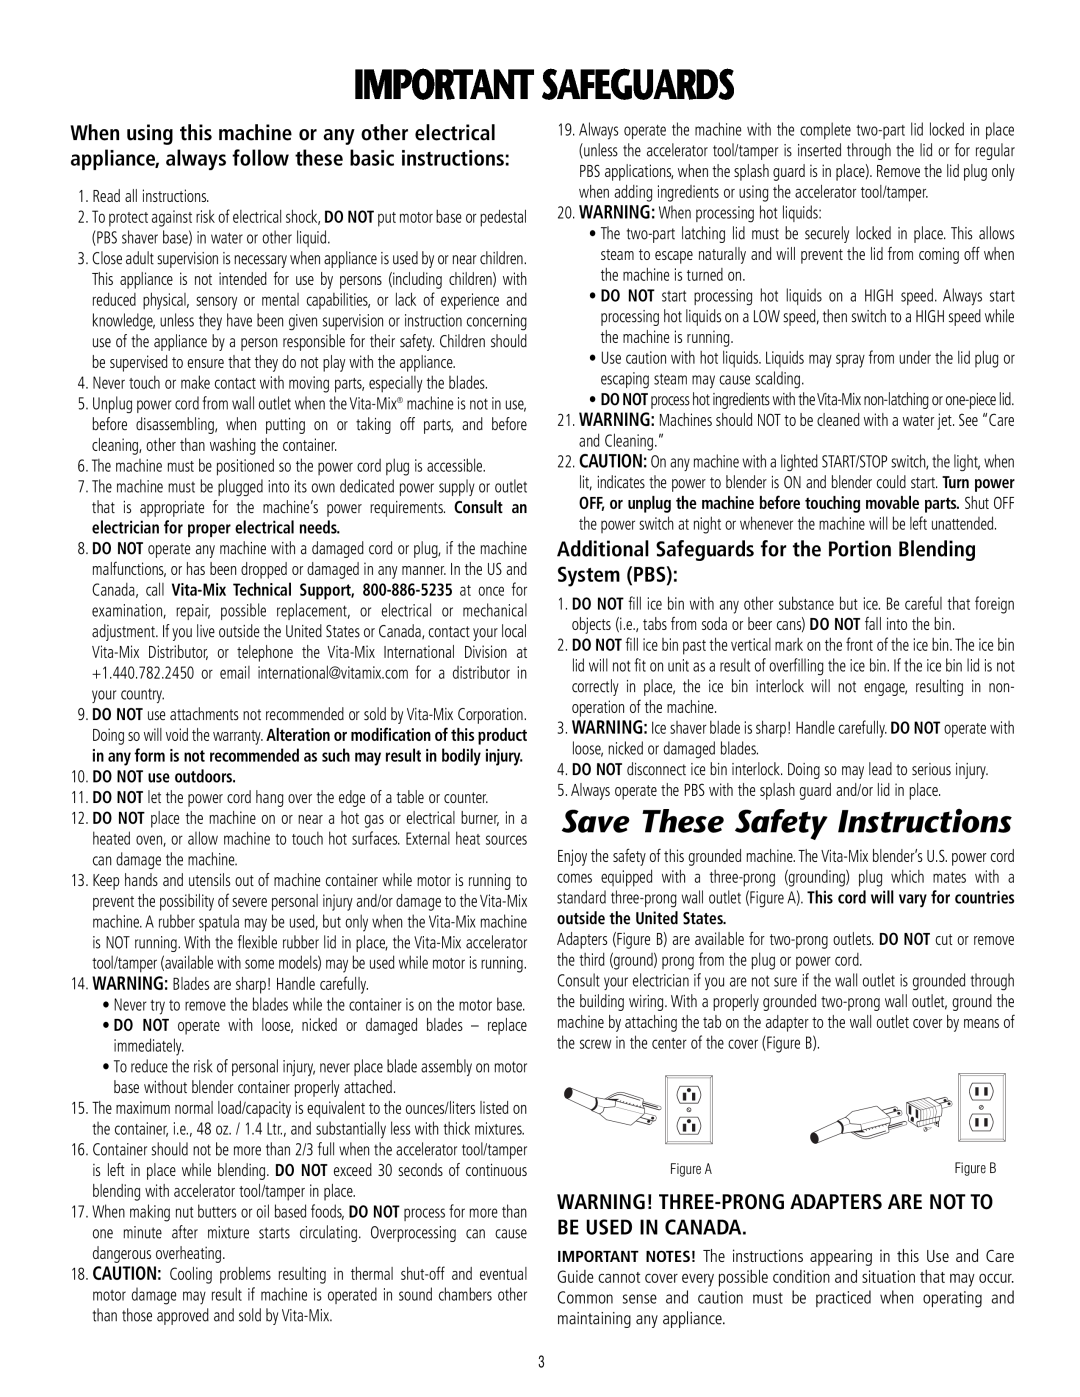 Vita-Mix 101807 manual Important Safeguards, Save These Safety Instructions 